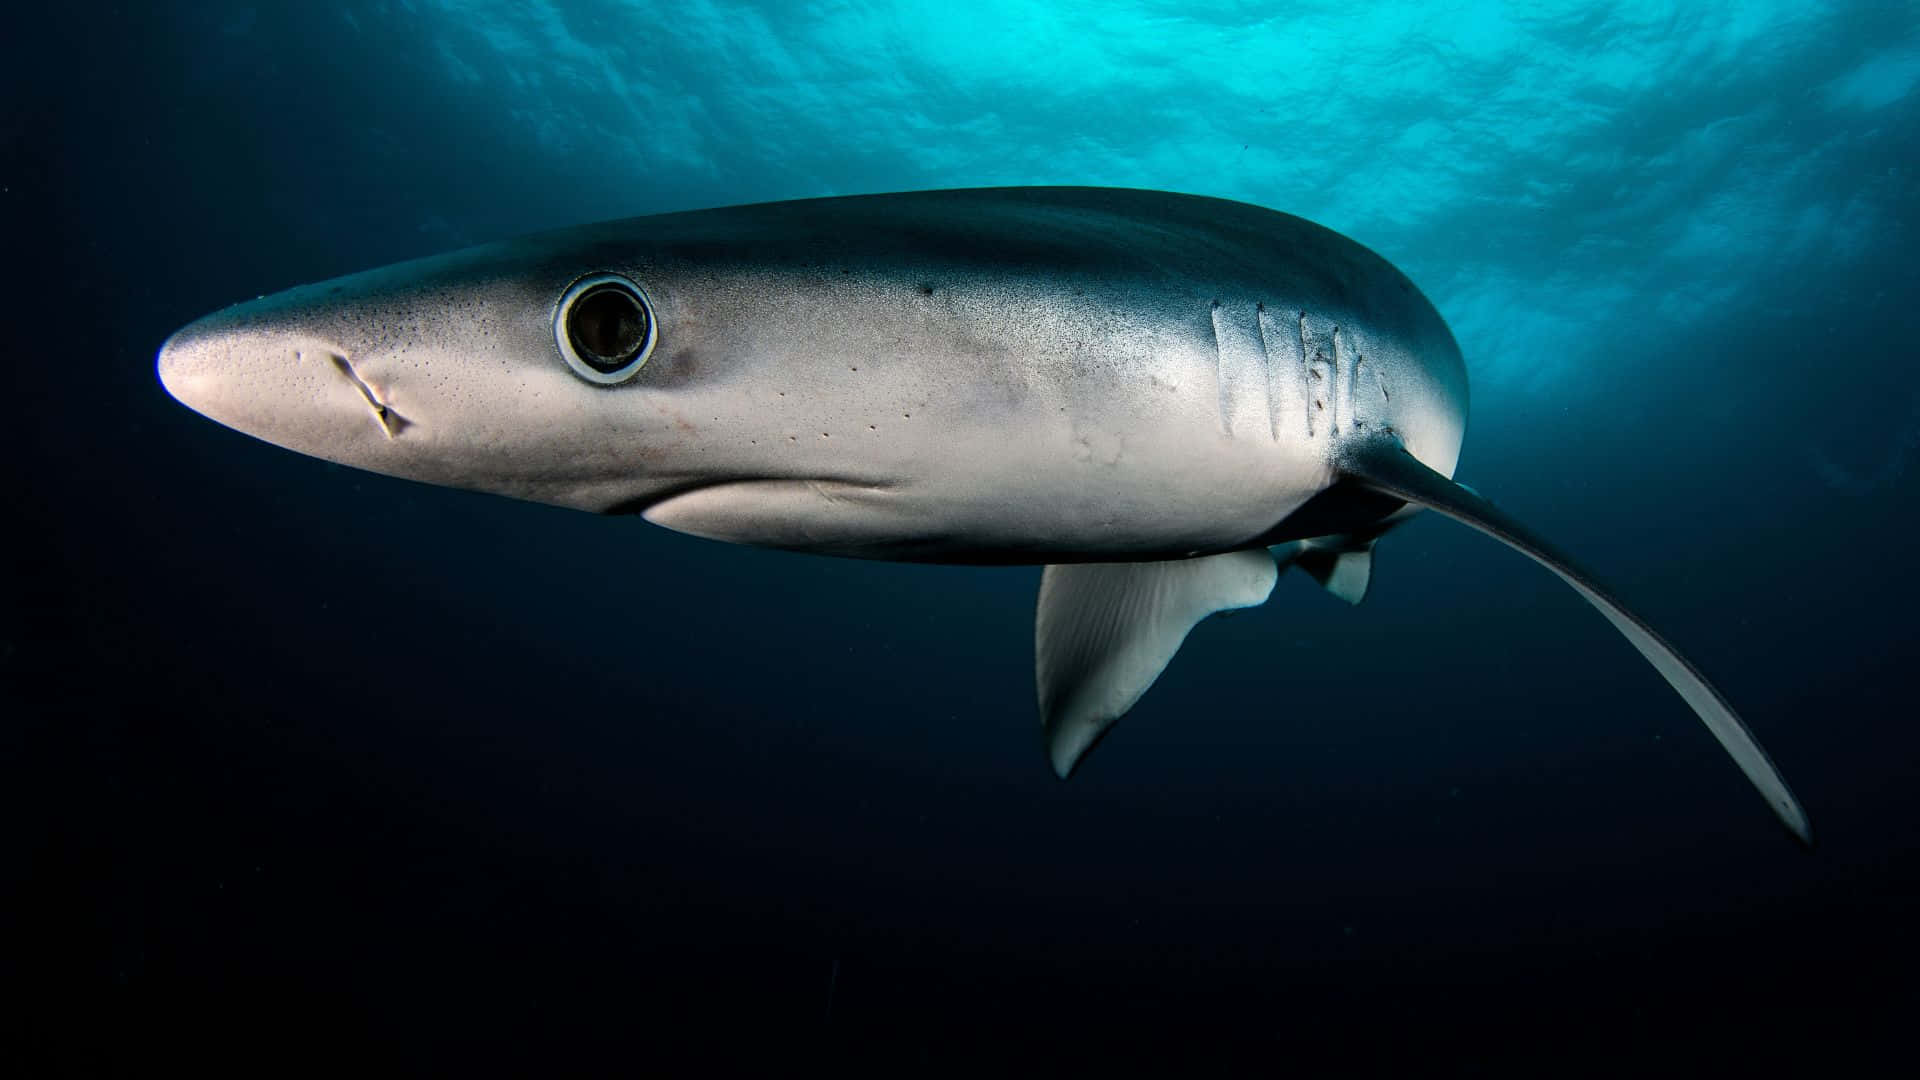 Unforgettable Encounter With The Intriguing Black Shark Background